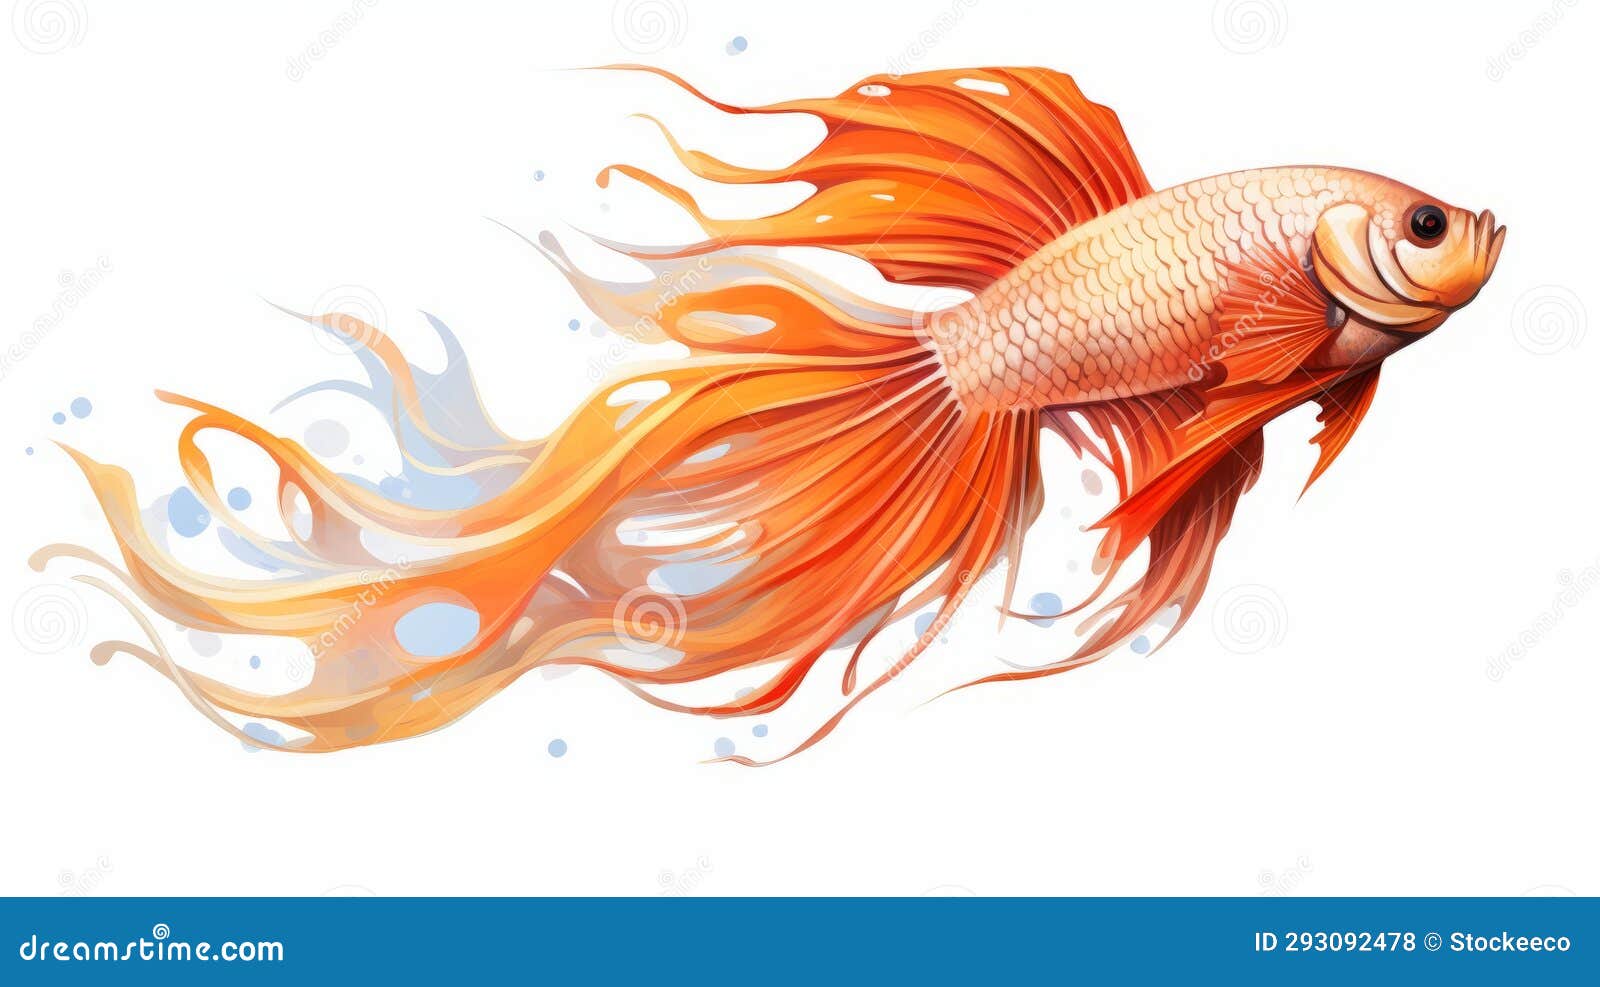 Beautiful Copper Orange Fish with Long Tail in Yuumei Style Stock